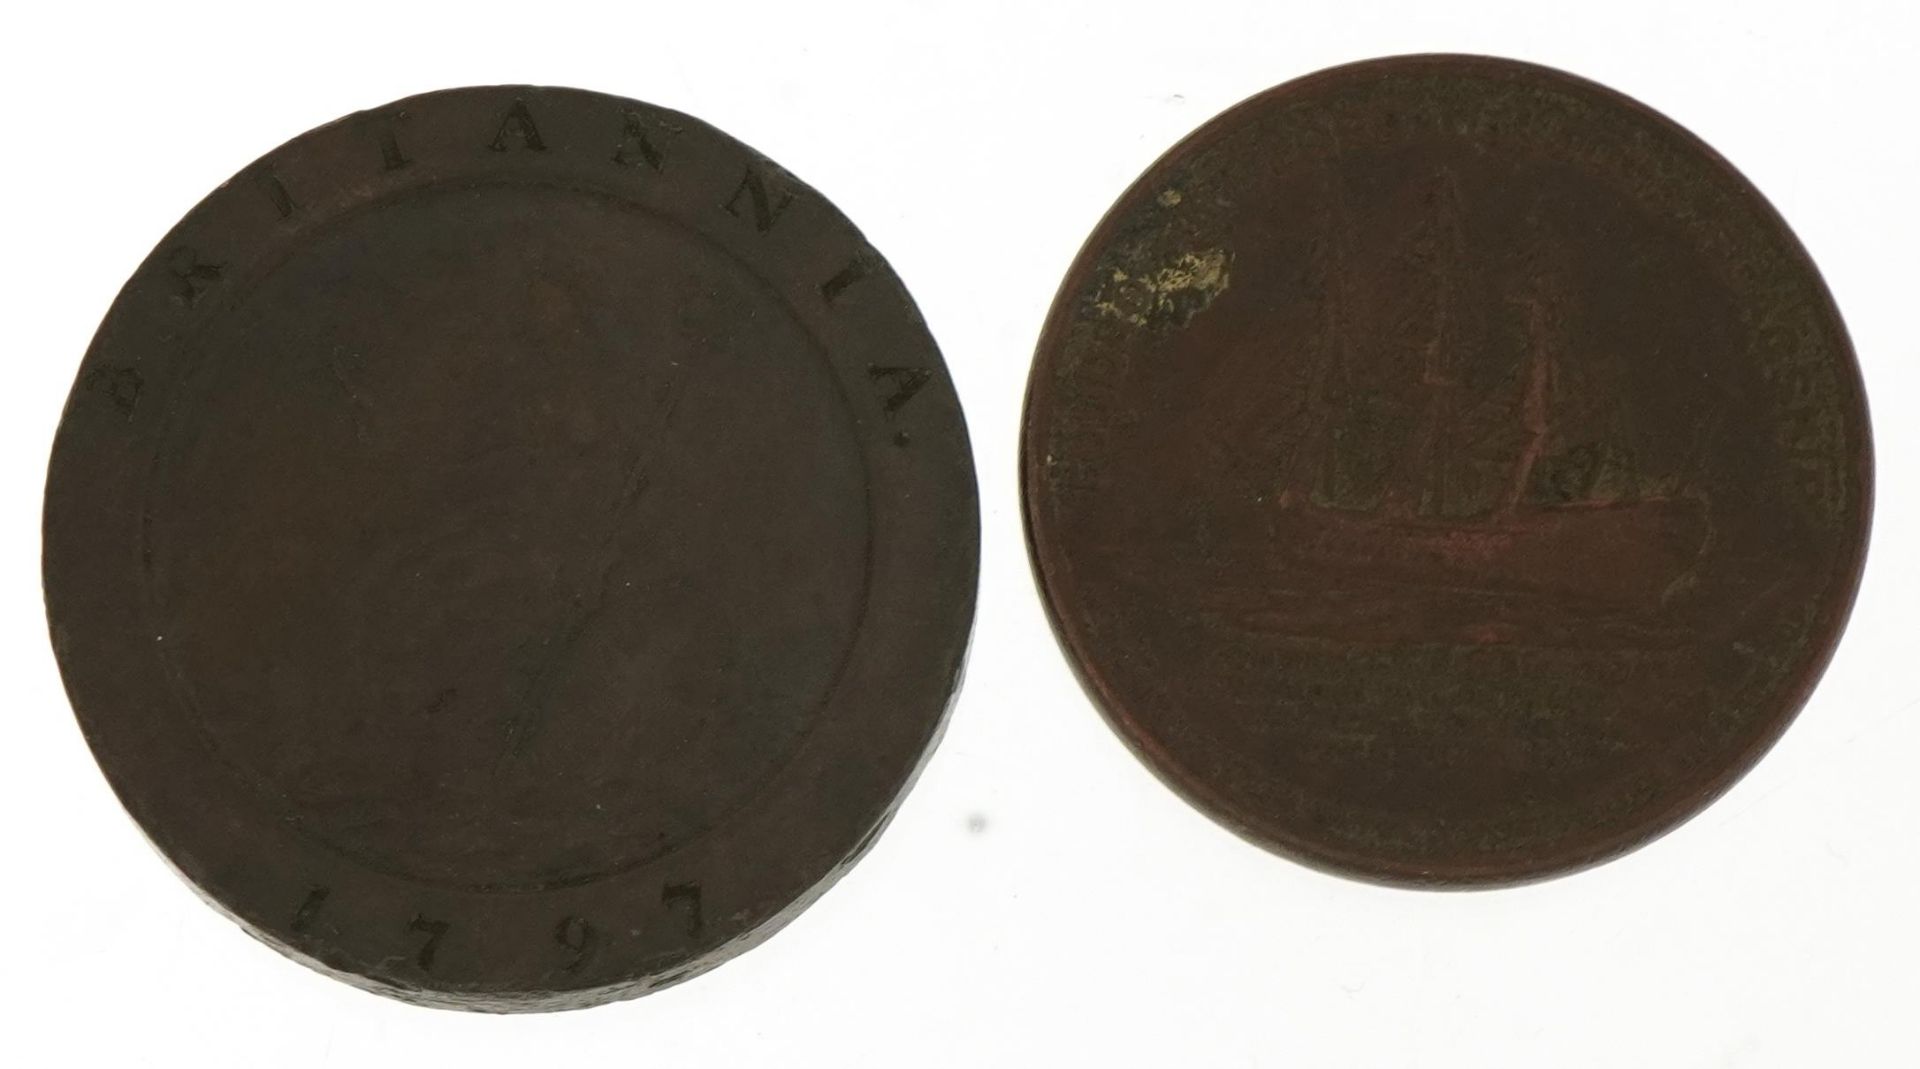 George III 1797 Cartwheel penny and a medal relating to Horatio Nelson commemorating HMS - Image 2 of 3